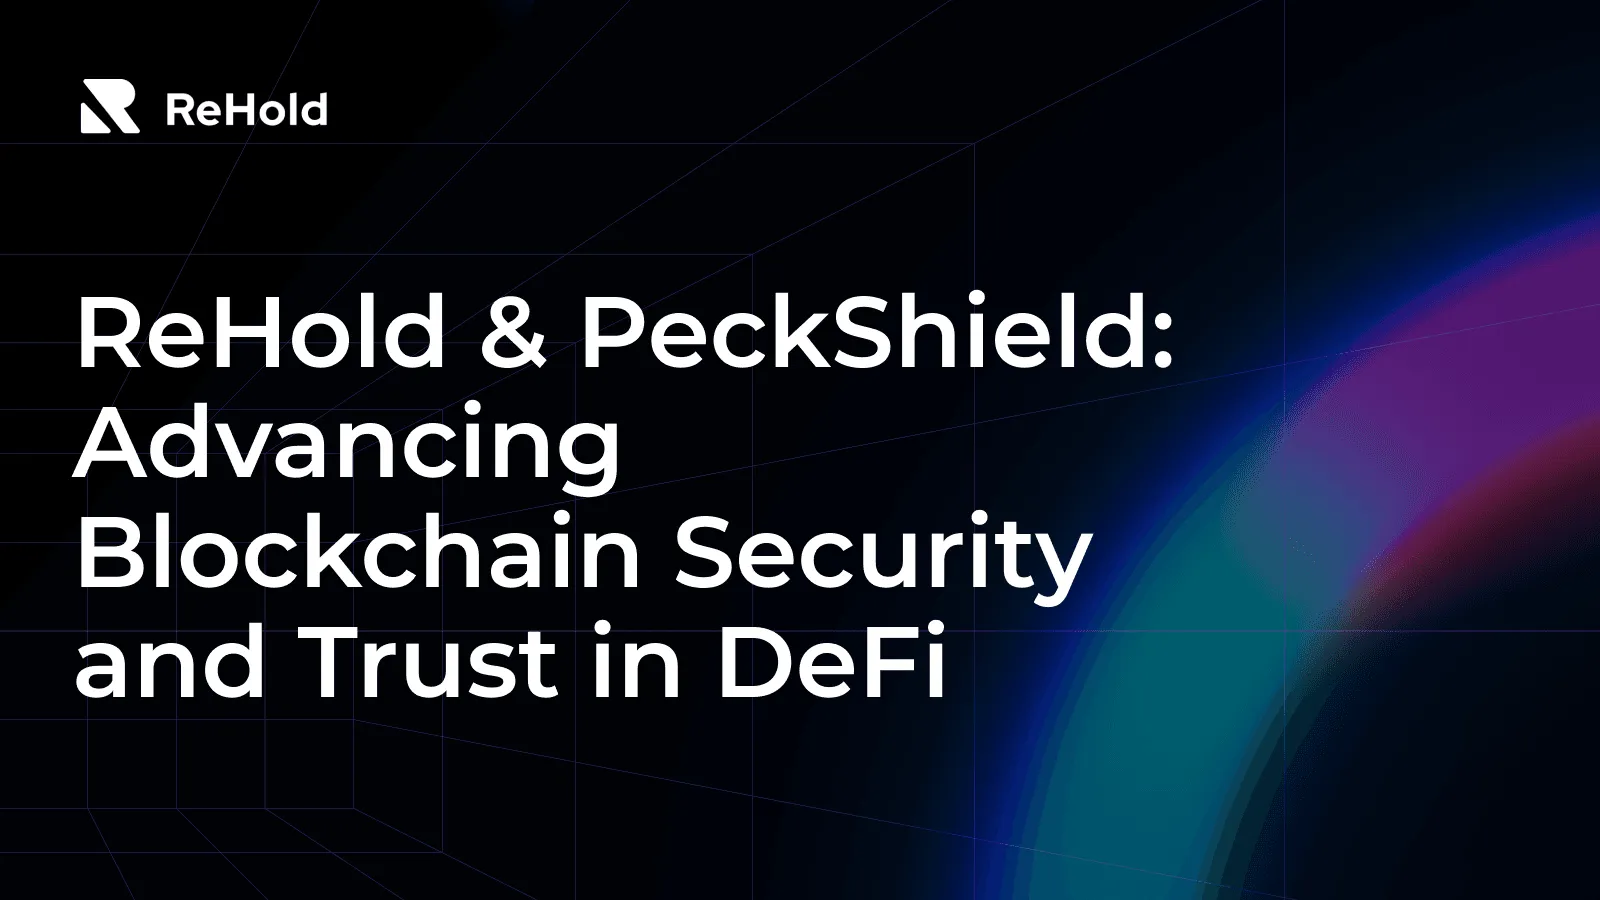 ReHold & PeckShield: Advancing Blockchain Security and Trust in DeFi